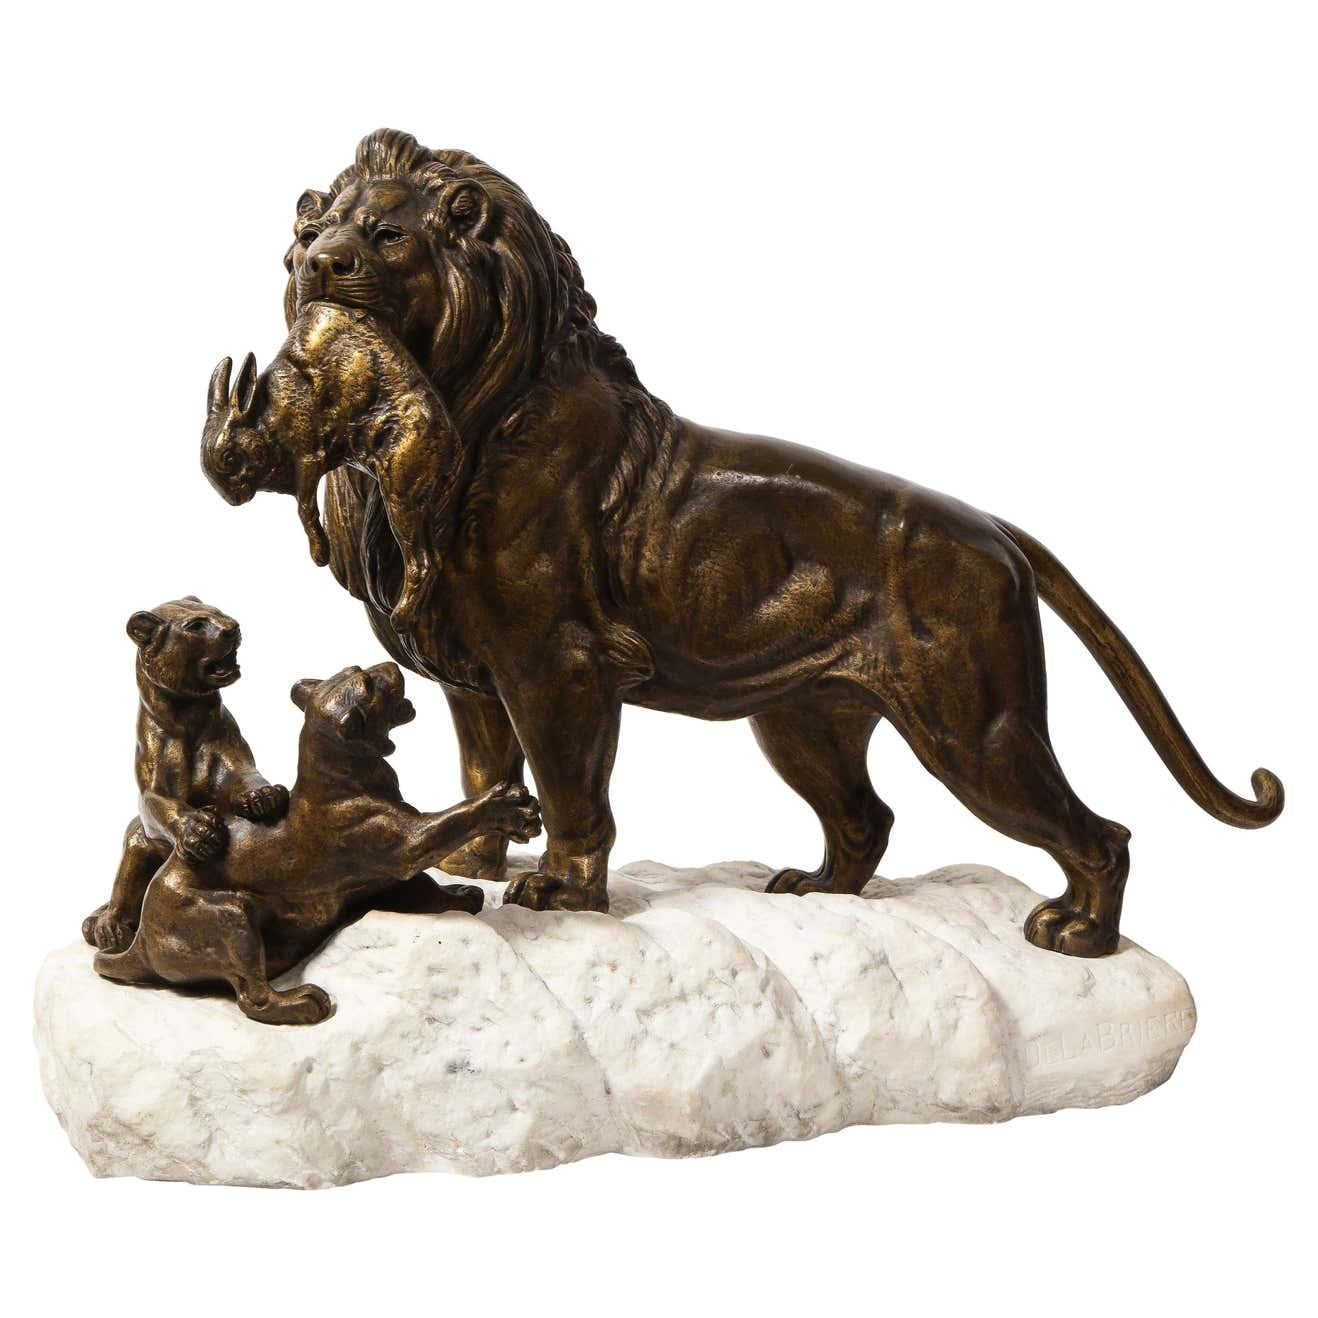 Paul-Edouard Delabriere (French, 1829-1923) Large Bronze Sculpture of A Lion with Cubs with A Squirrel as its Prey, on a white marble rock base.  

Very nice quality 19th century sculpture. Signed DELABRIERE on the lower right marble. Perfect for